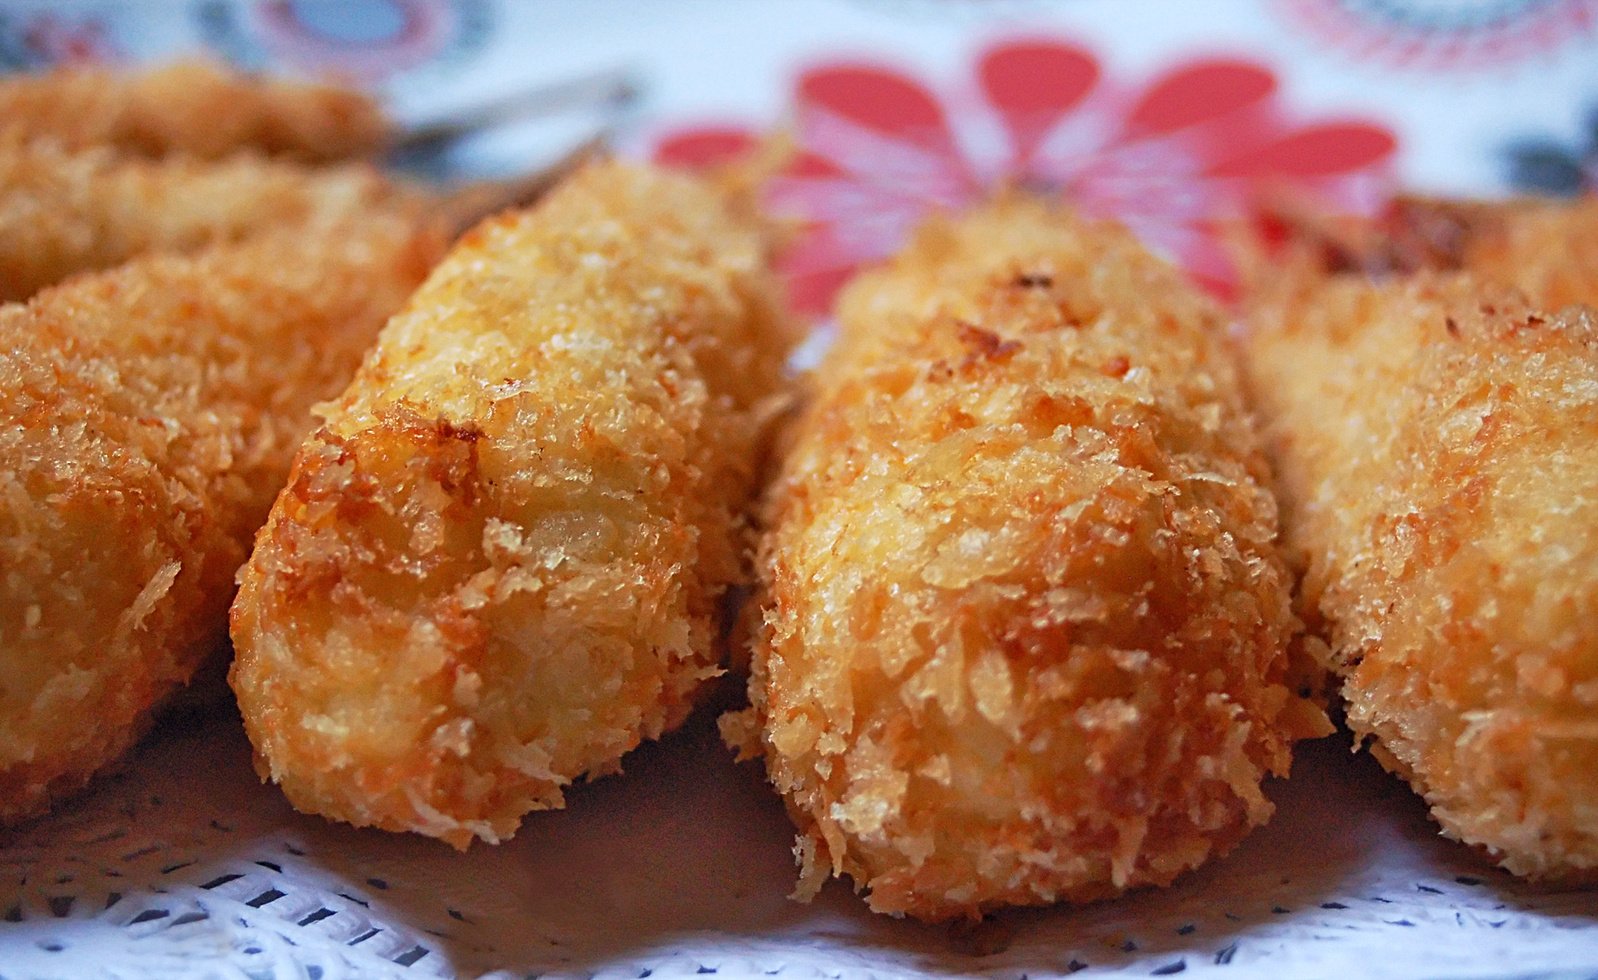 five fried food items sitting on top of a paper doily